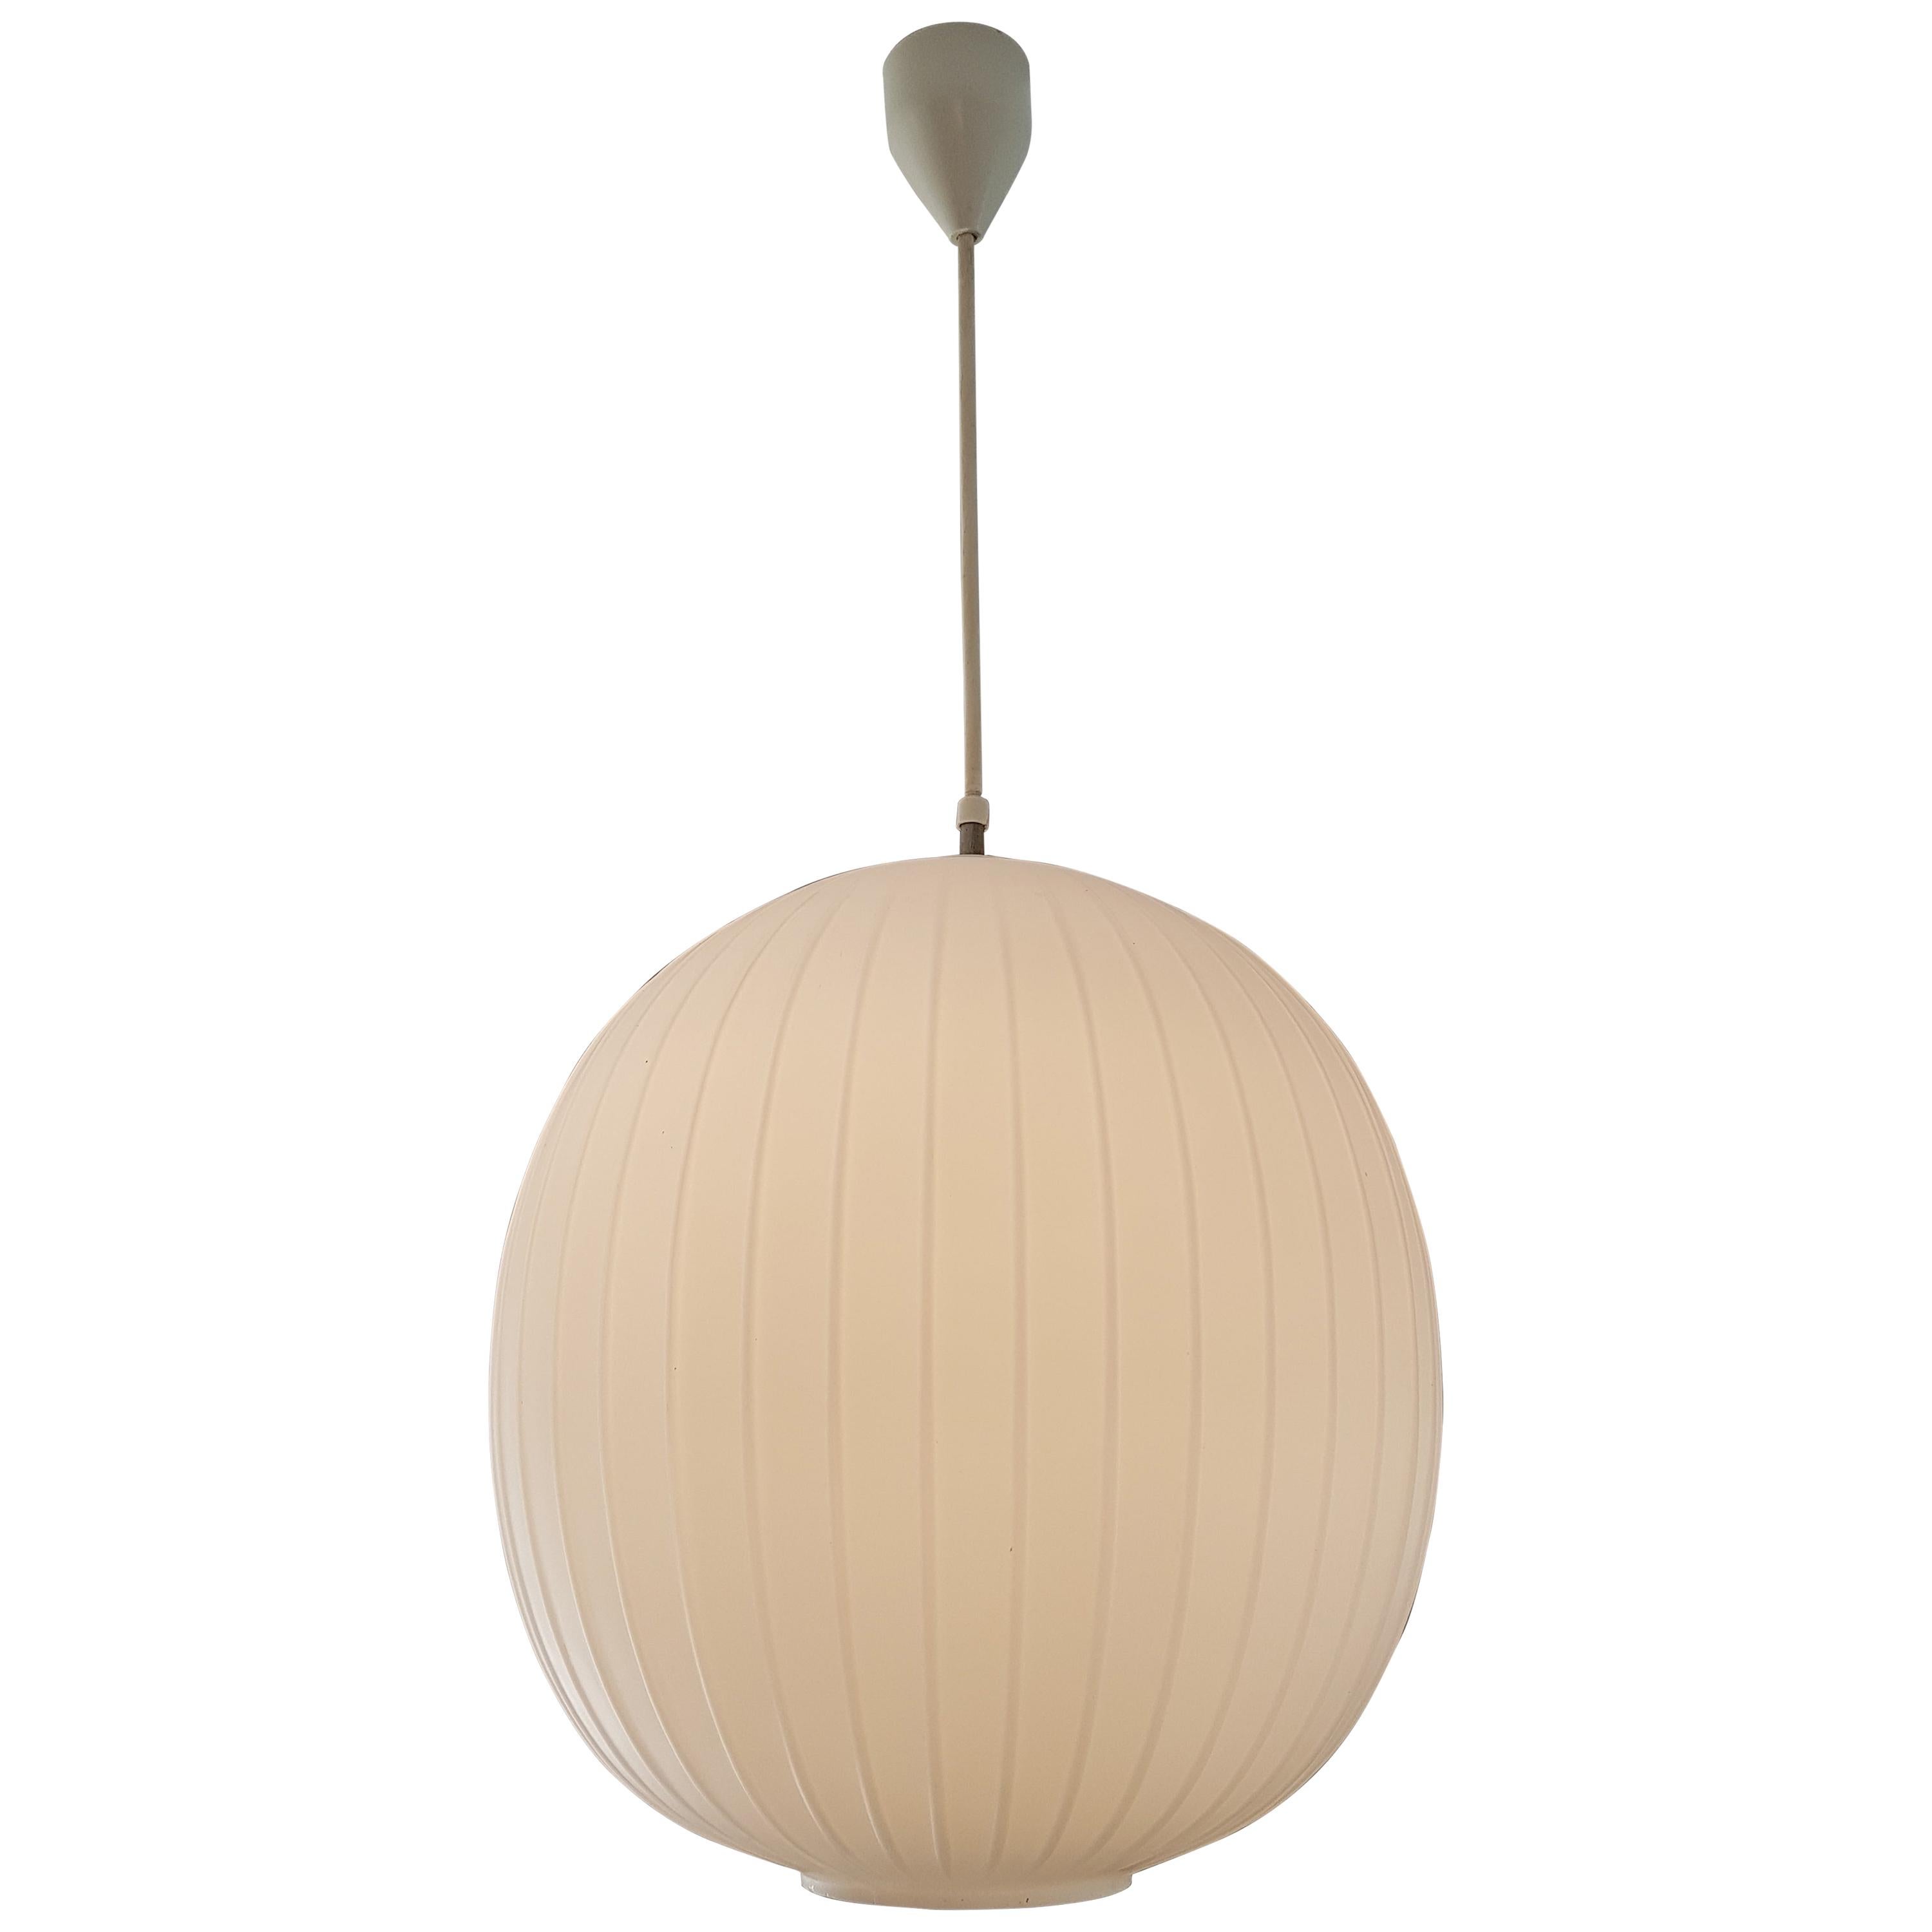 Midcentury Pendant Lamp Bologna by Gangkofner for Peill & Putzler, Germany, 1958 For Sale